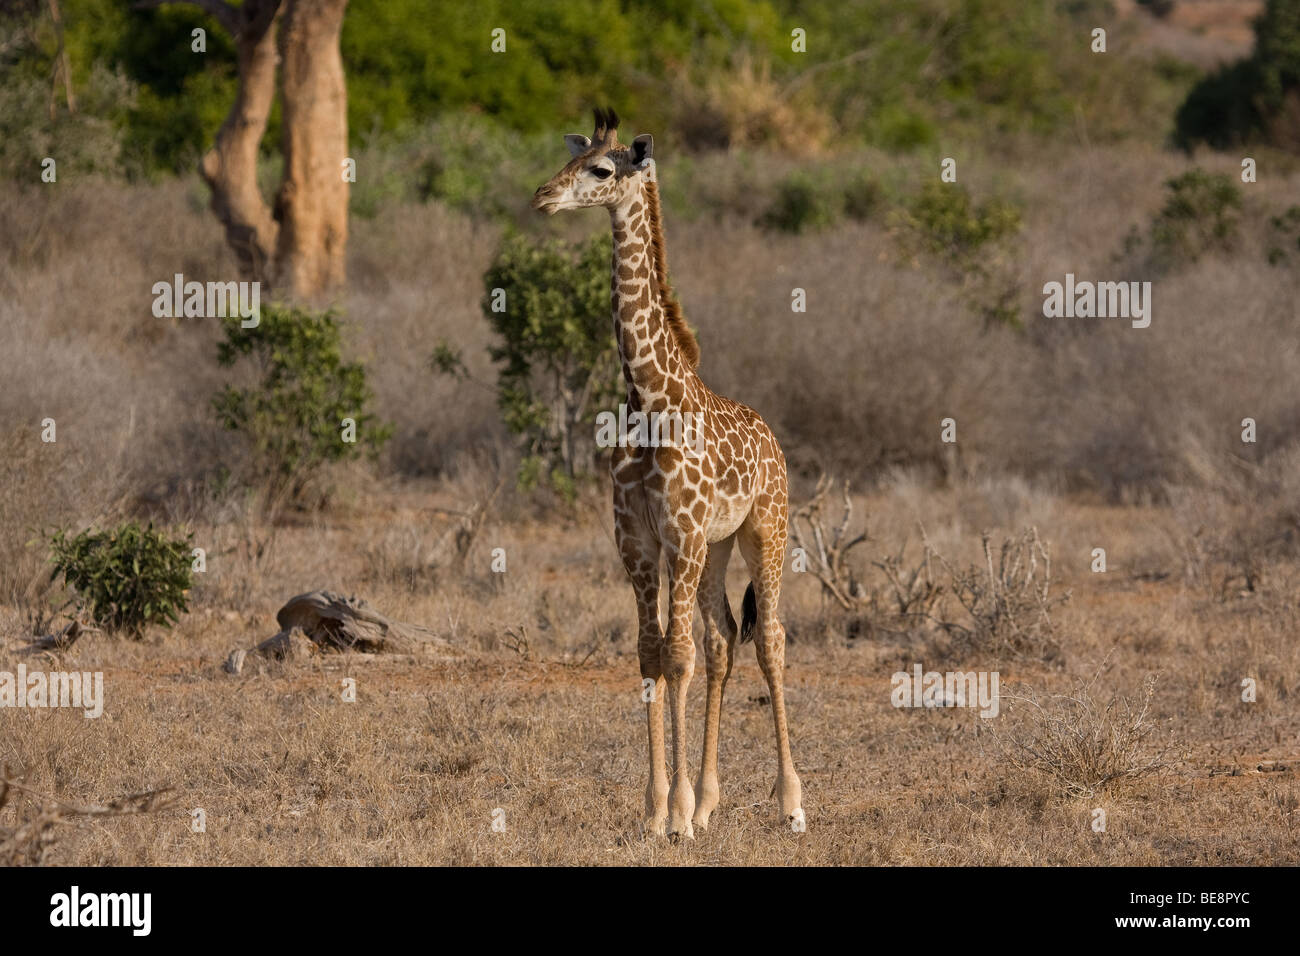 A baby giraffe standing upright looking at something to the right in the tsavo east national park in Kenya. Stock Photo